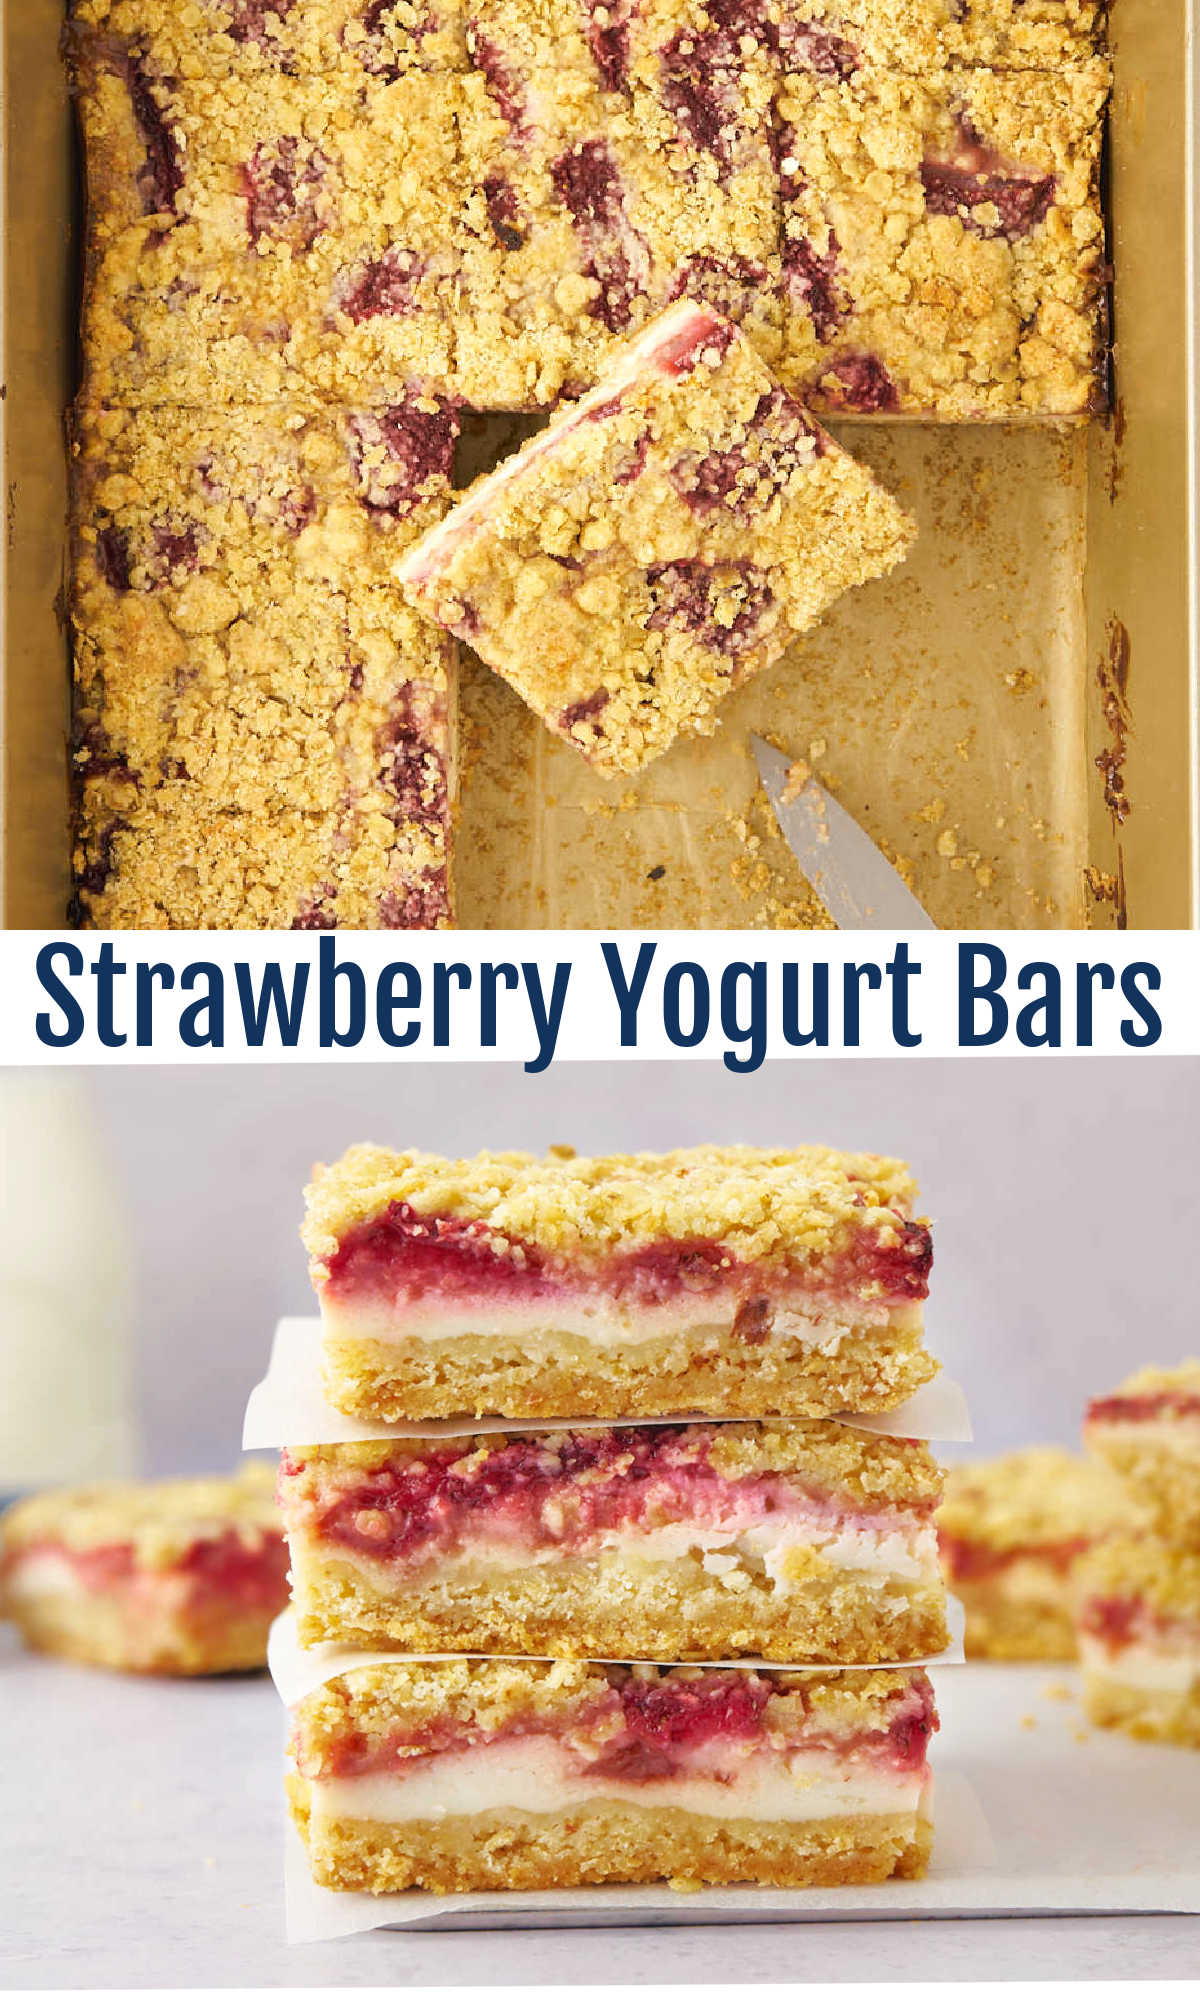 Strawberry yogurt crumb bars bring together fresh berries with a creamy yogurt layer all nestled between buttery crumbs. They are a magical way to celebrate spring sweetness.